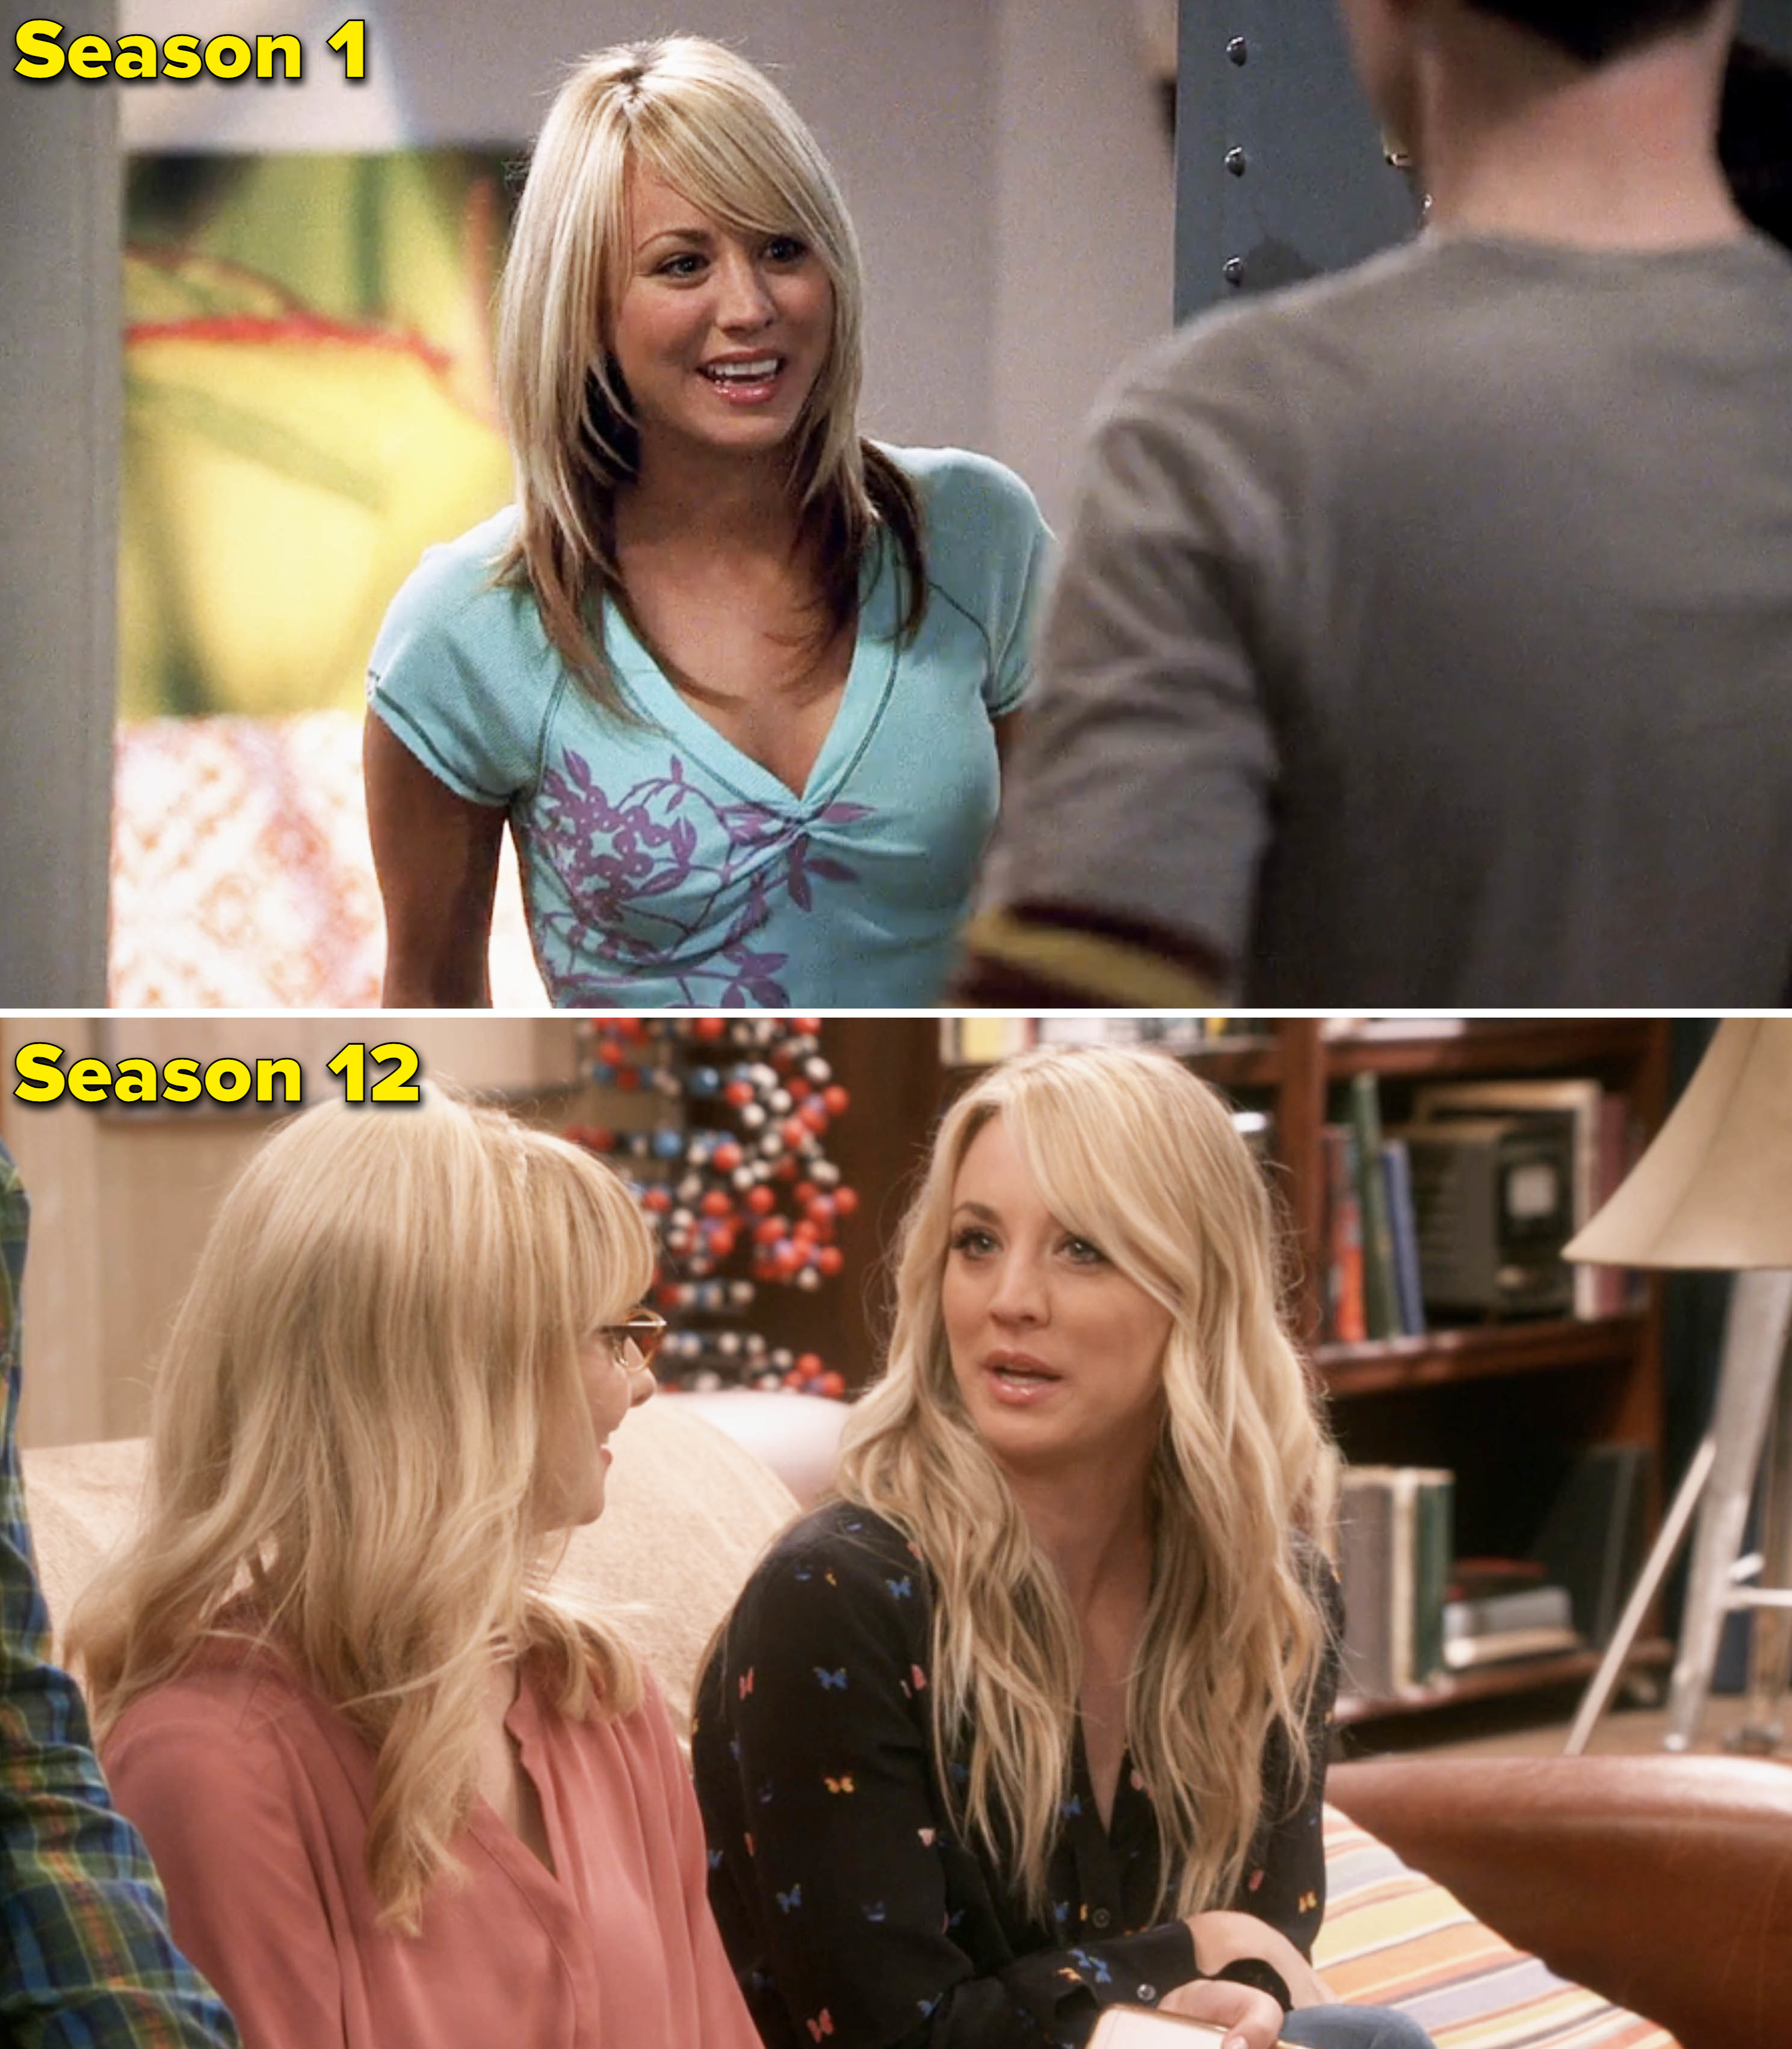 Kaley in seasons 1 and 12